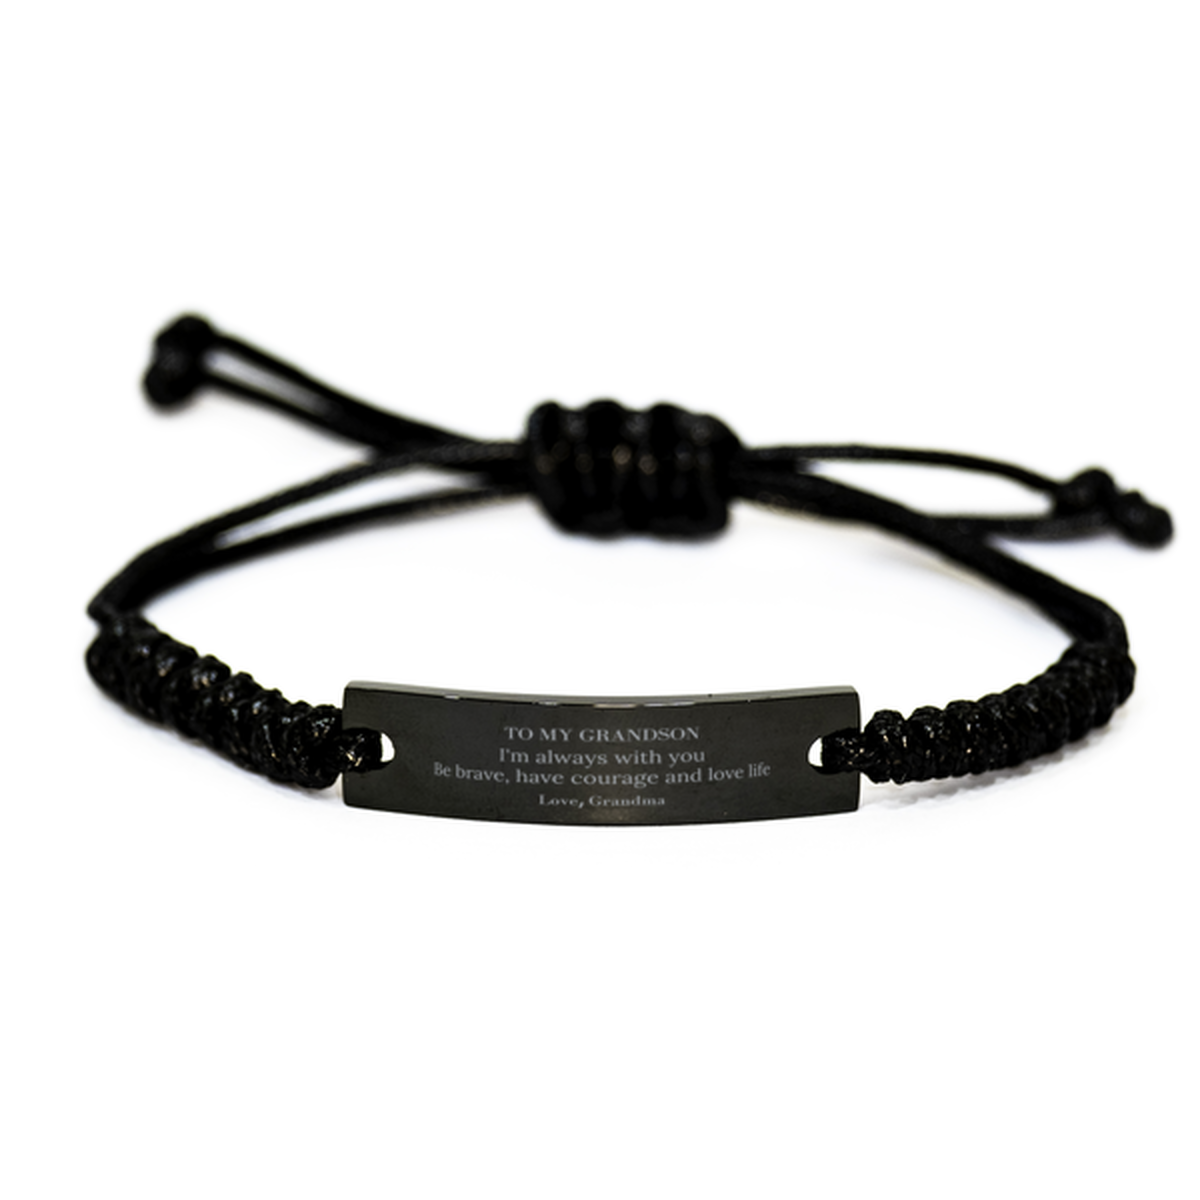 To My Grandson Gifts from Grandma, Unique Black Rope Bracelet Inspirational Christmas Birthday Graduation Gifts for Grandson I'm always with you. Be brave, have courage and love life. Love, Grandma